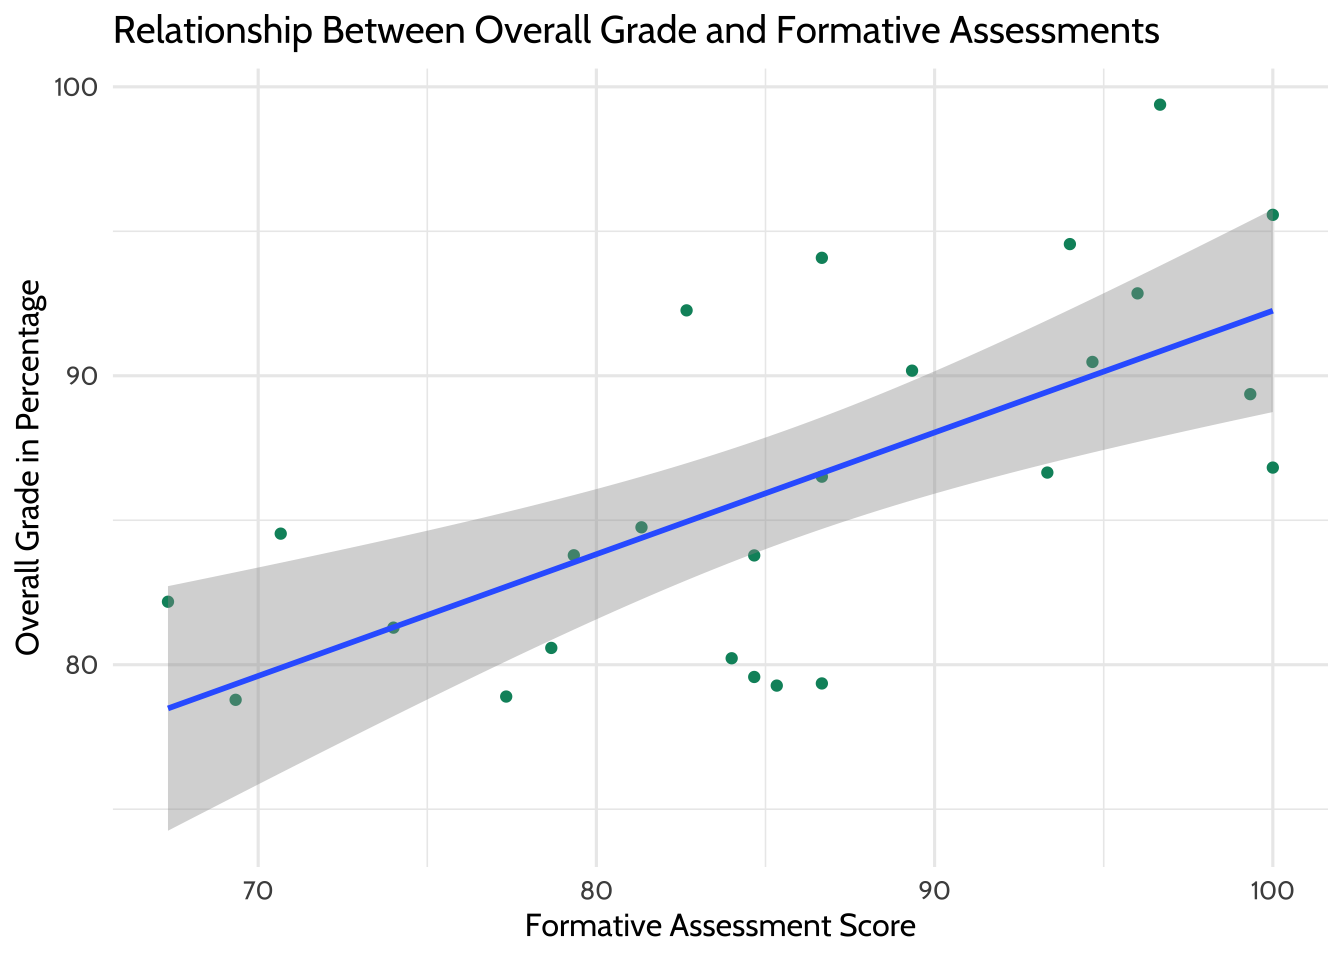 Relationship Between Overall Grade and Formative Assessments (with Line of Best Fit)